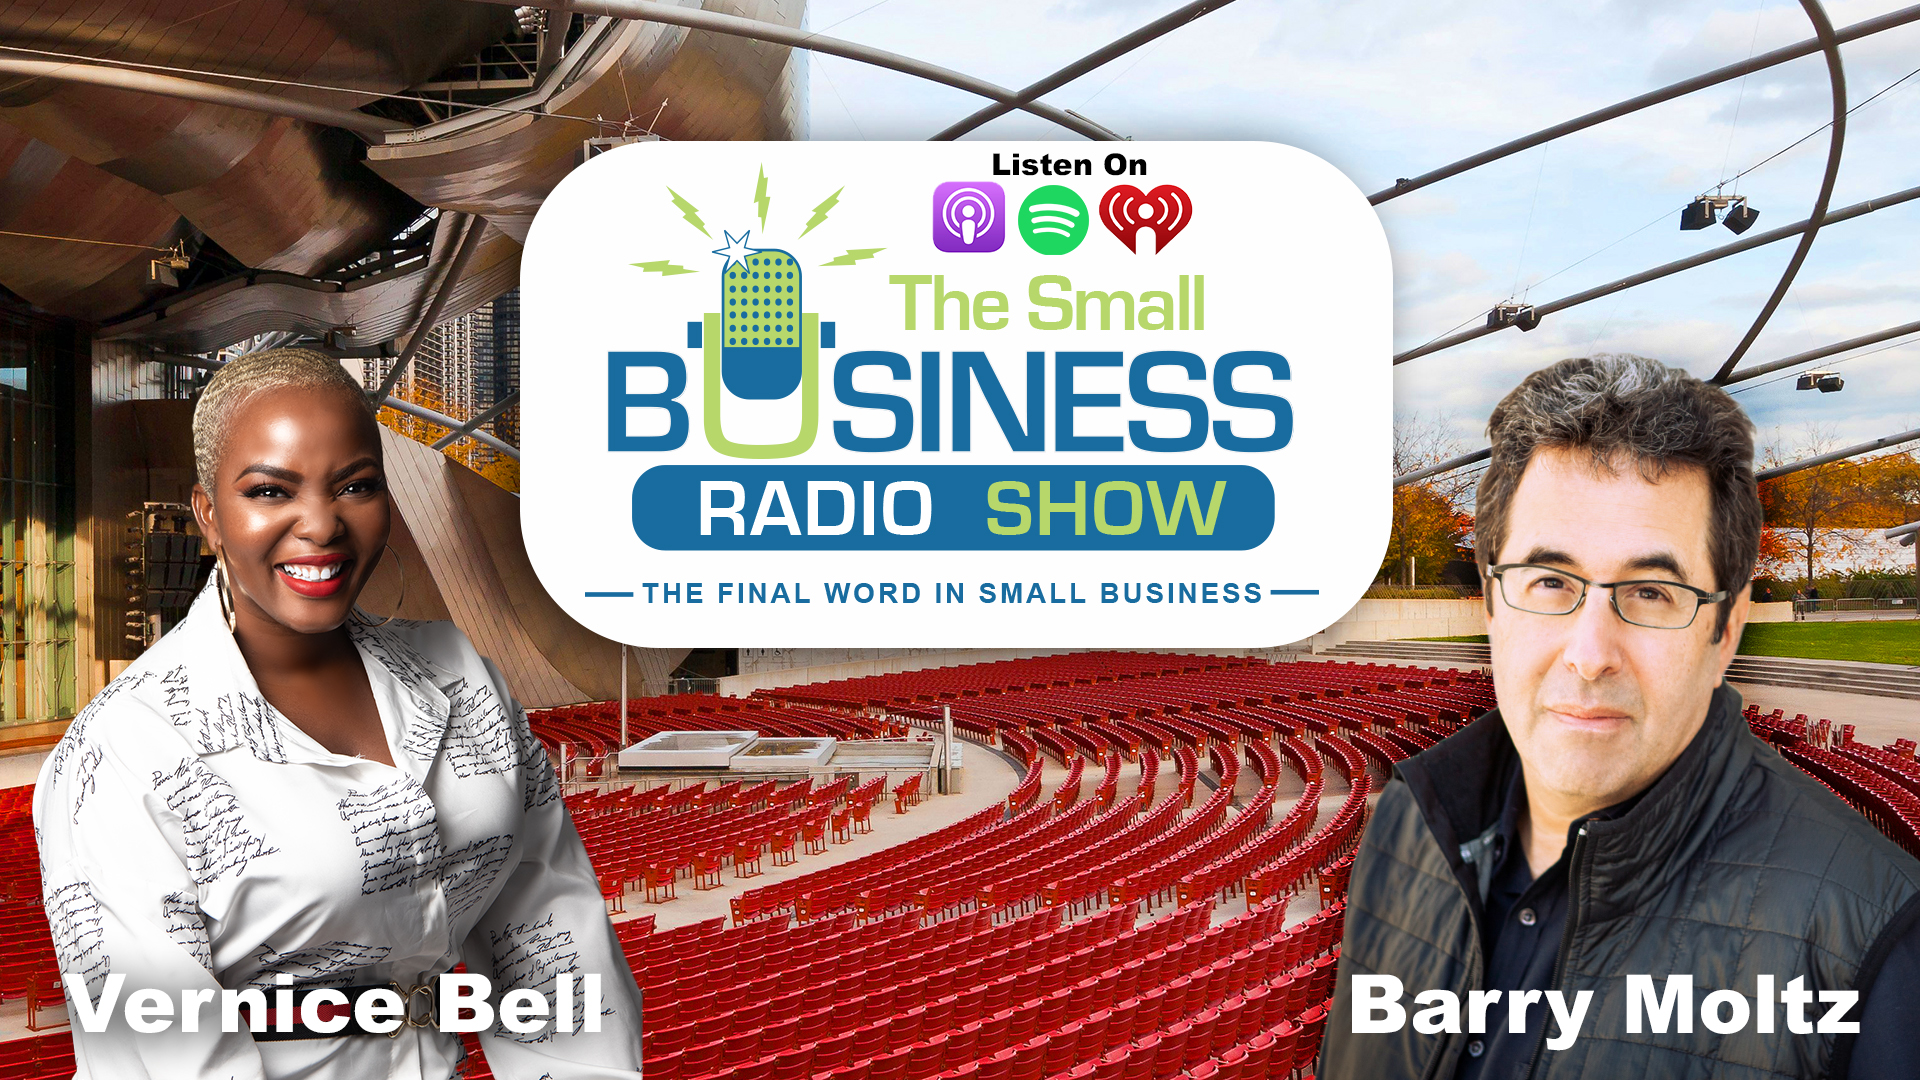 Vernice Bell on The Small Business Radio Show